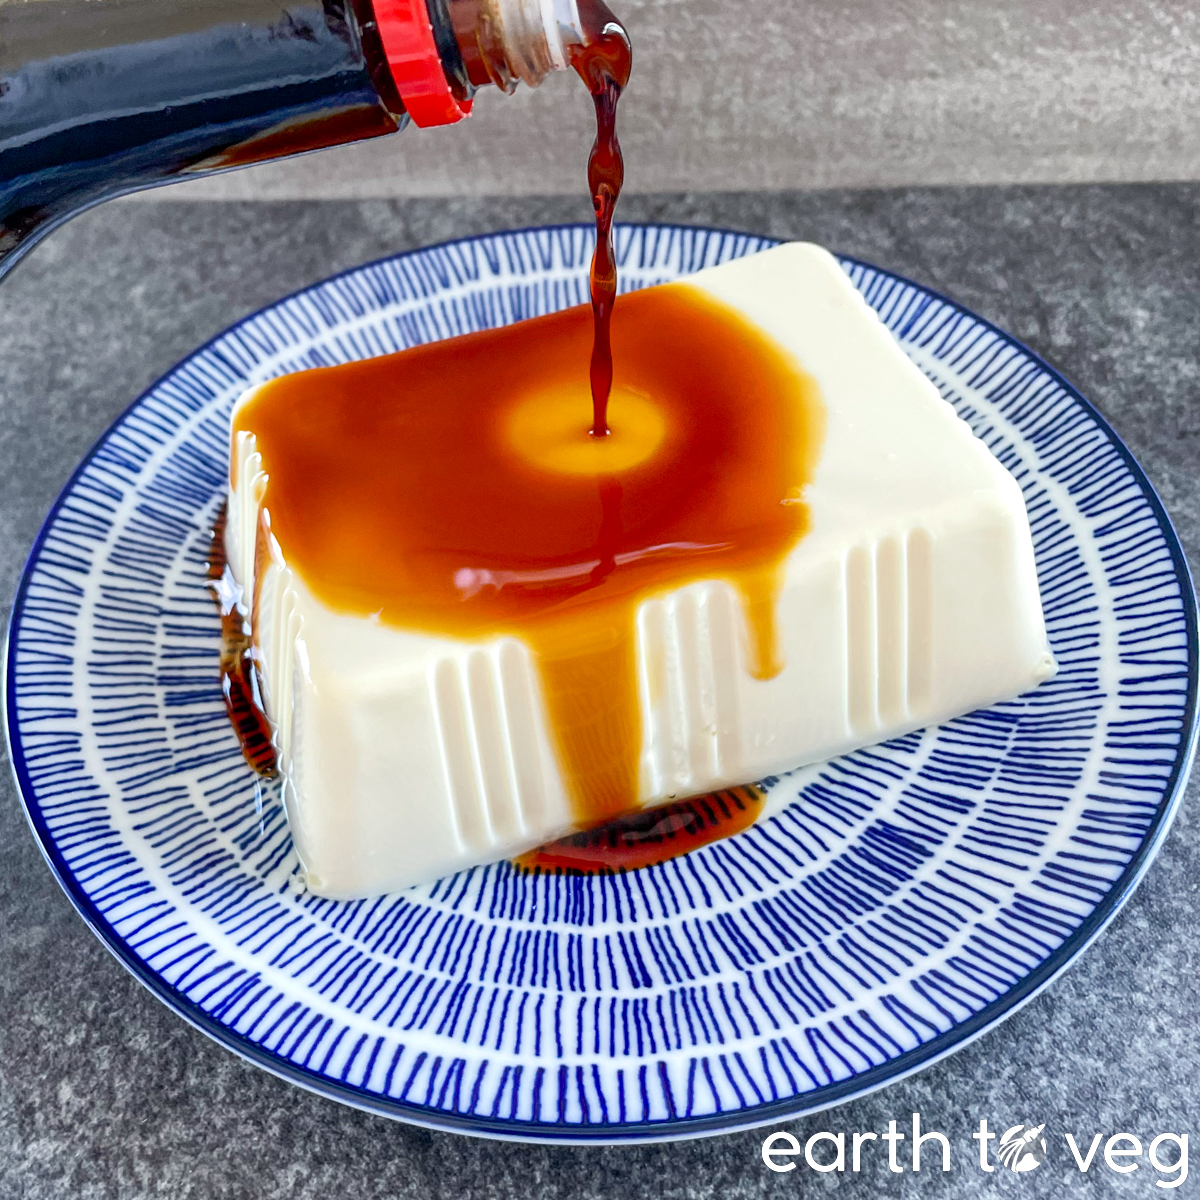 Kikkoman soy sauce is drizzled over a block of cold soft tofu.